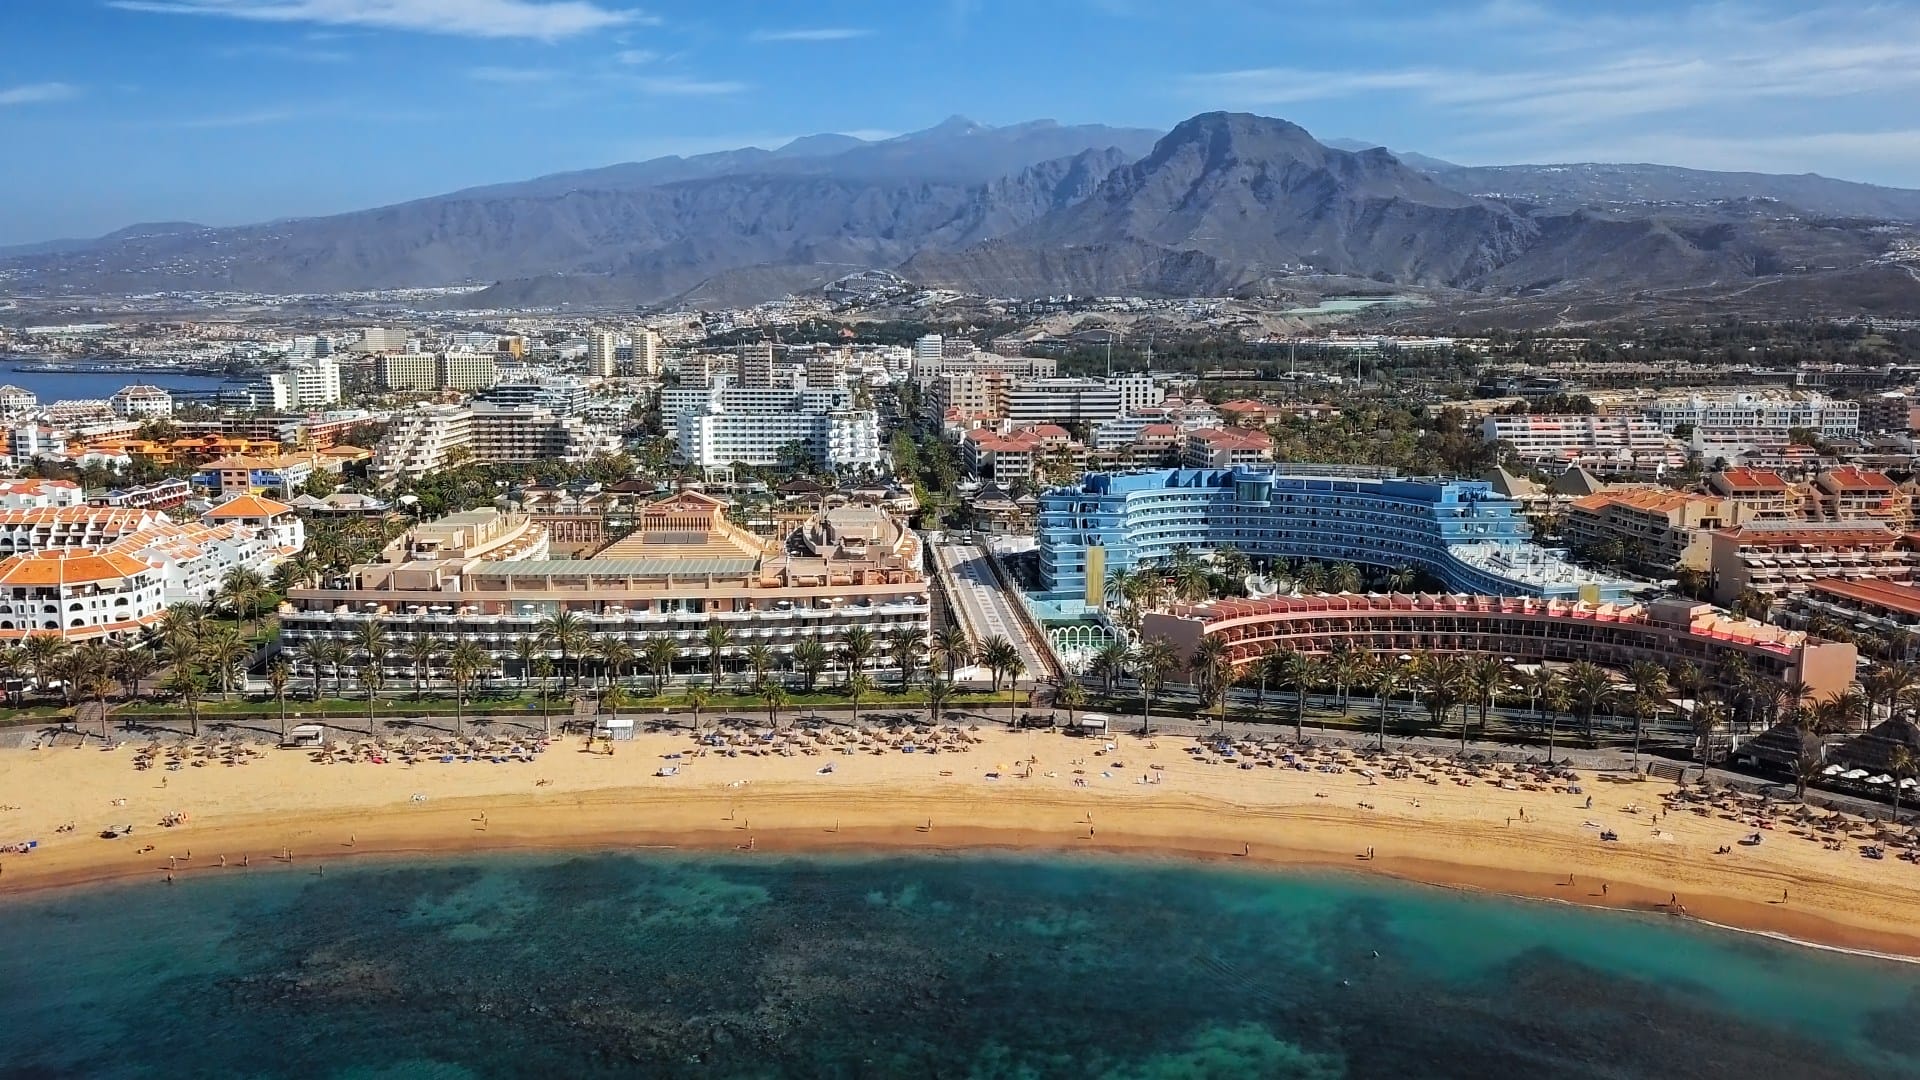 Autistic boy, 11, ‘sexually assaulted’ at Tenerife resort in front of his family who ‘chased suspect out of the hotel’